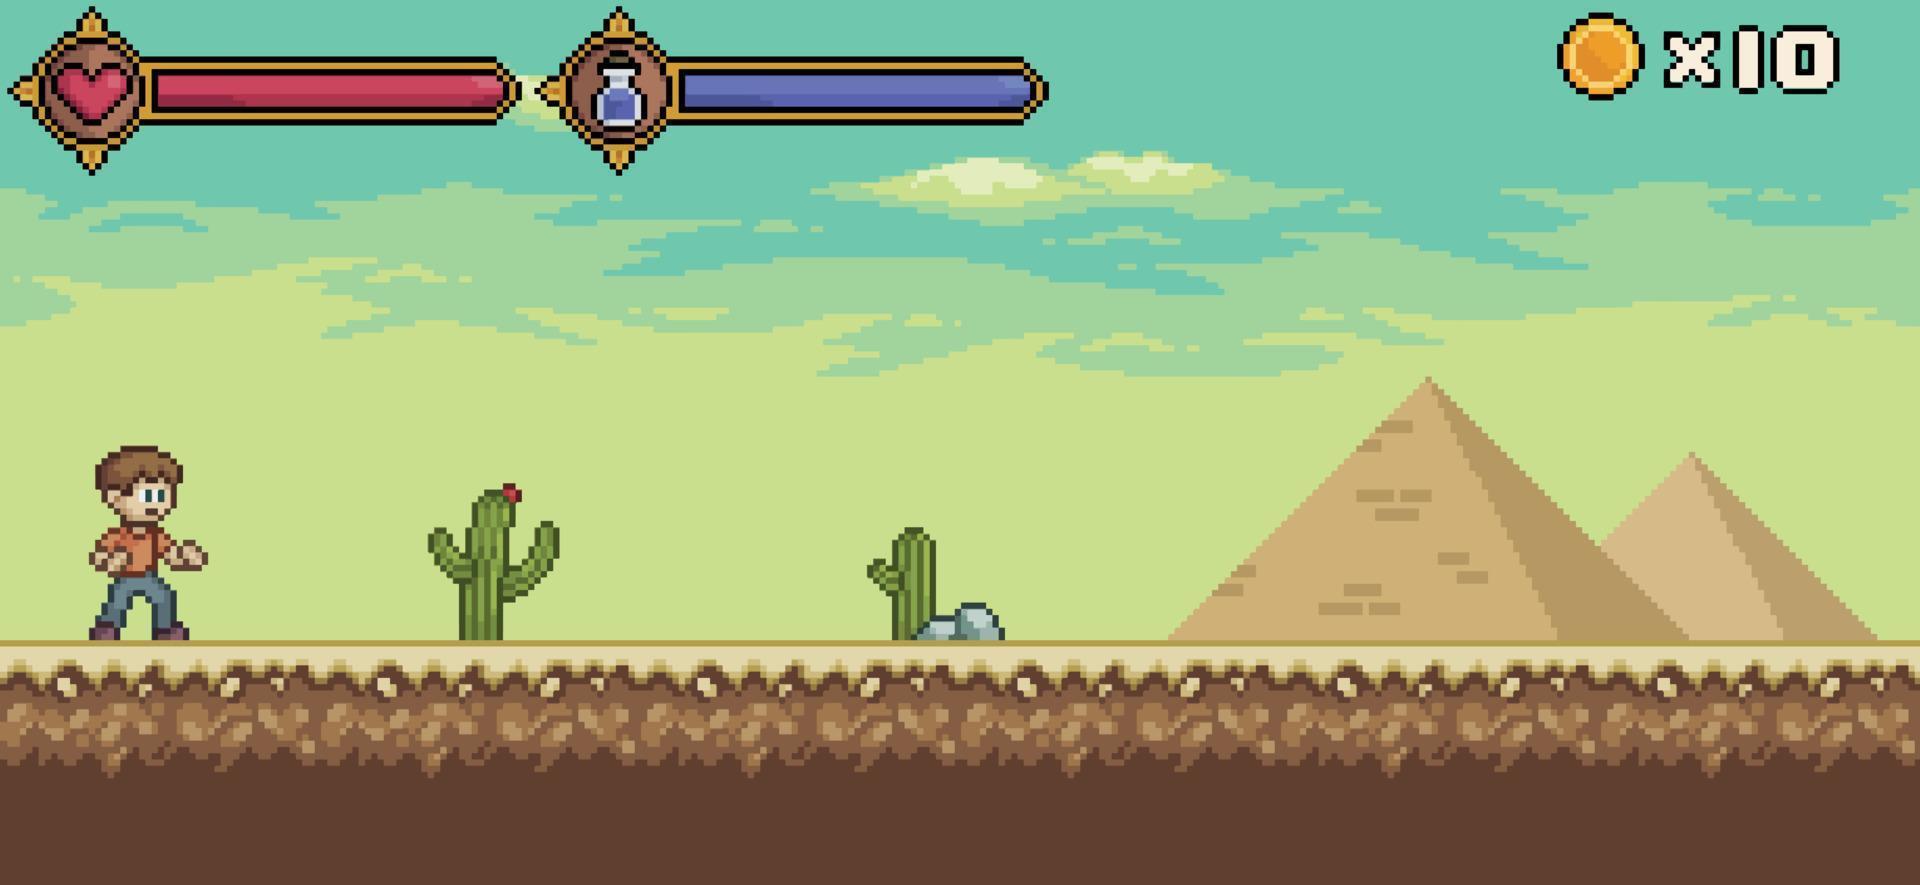 Pixel art desert game scene with character, life bar and mana vector background for 8bit game